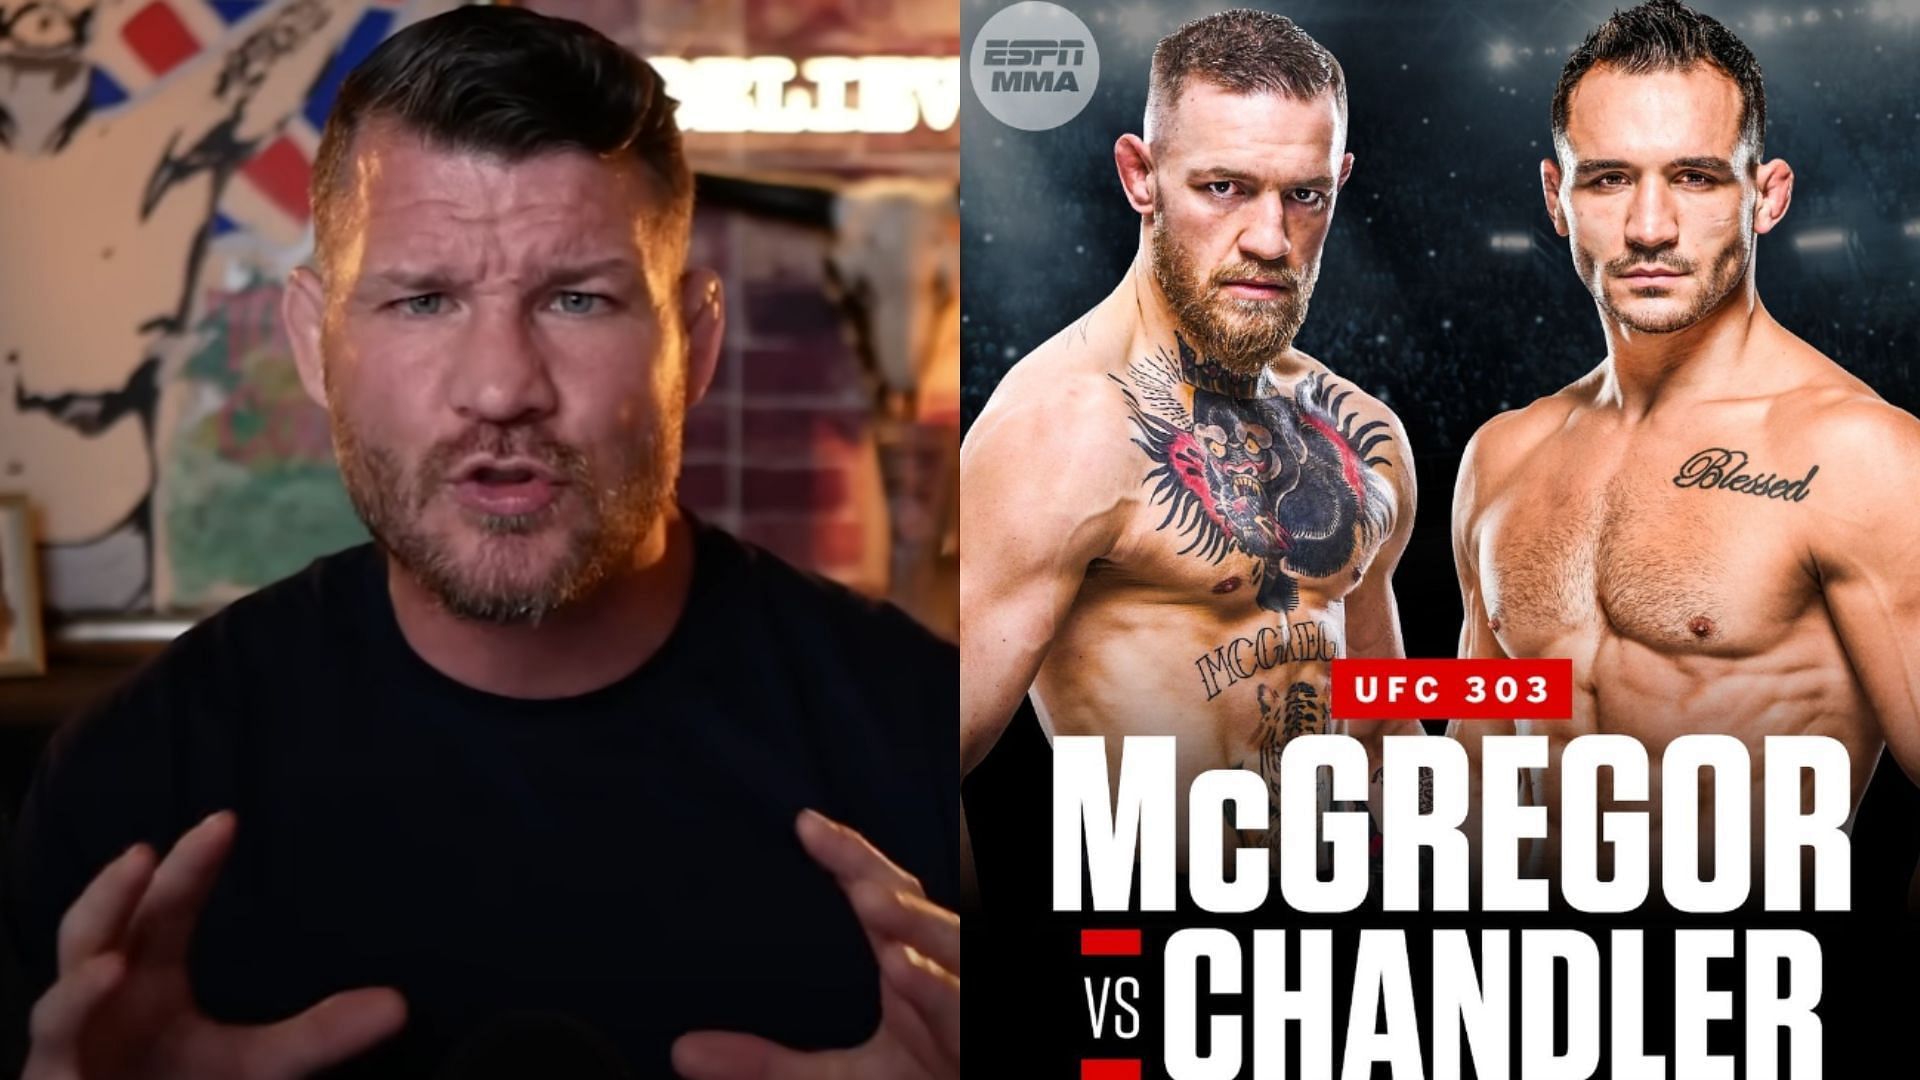 Michael Bisping (left) warns Michael Chandler (right) not to underestimate Conor McGregor [Images courtesy of @mikechandlermma on Instagram &amp; Michael Bisping on YouTube]